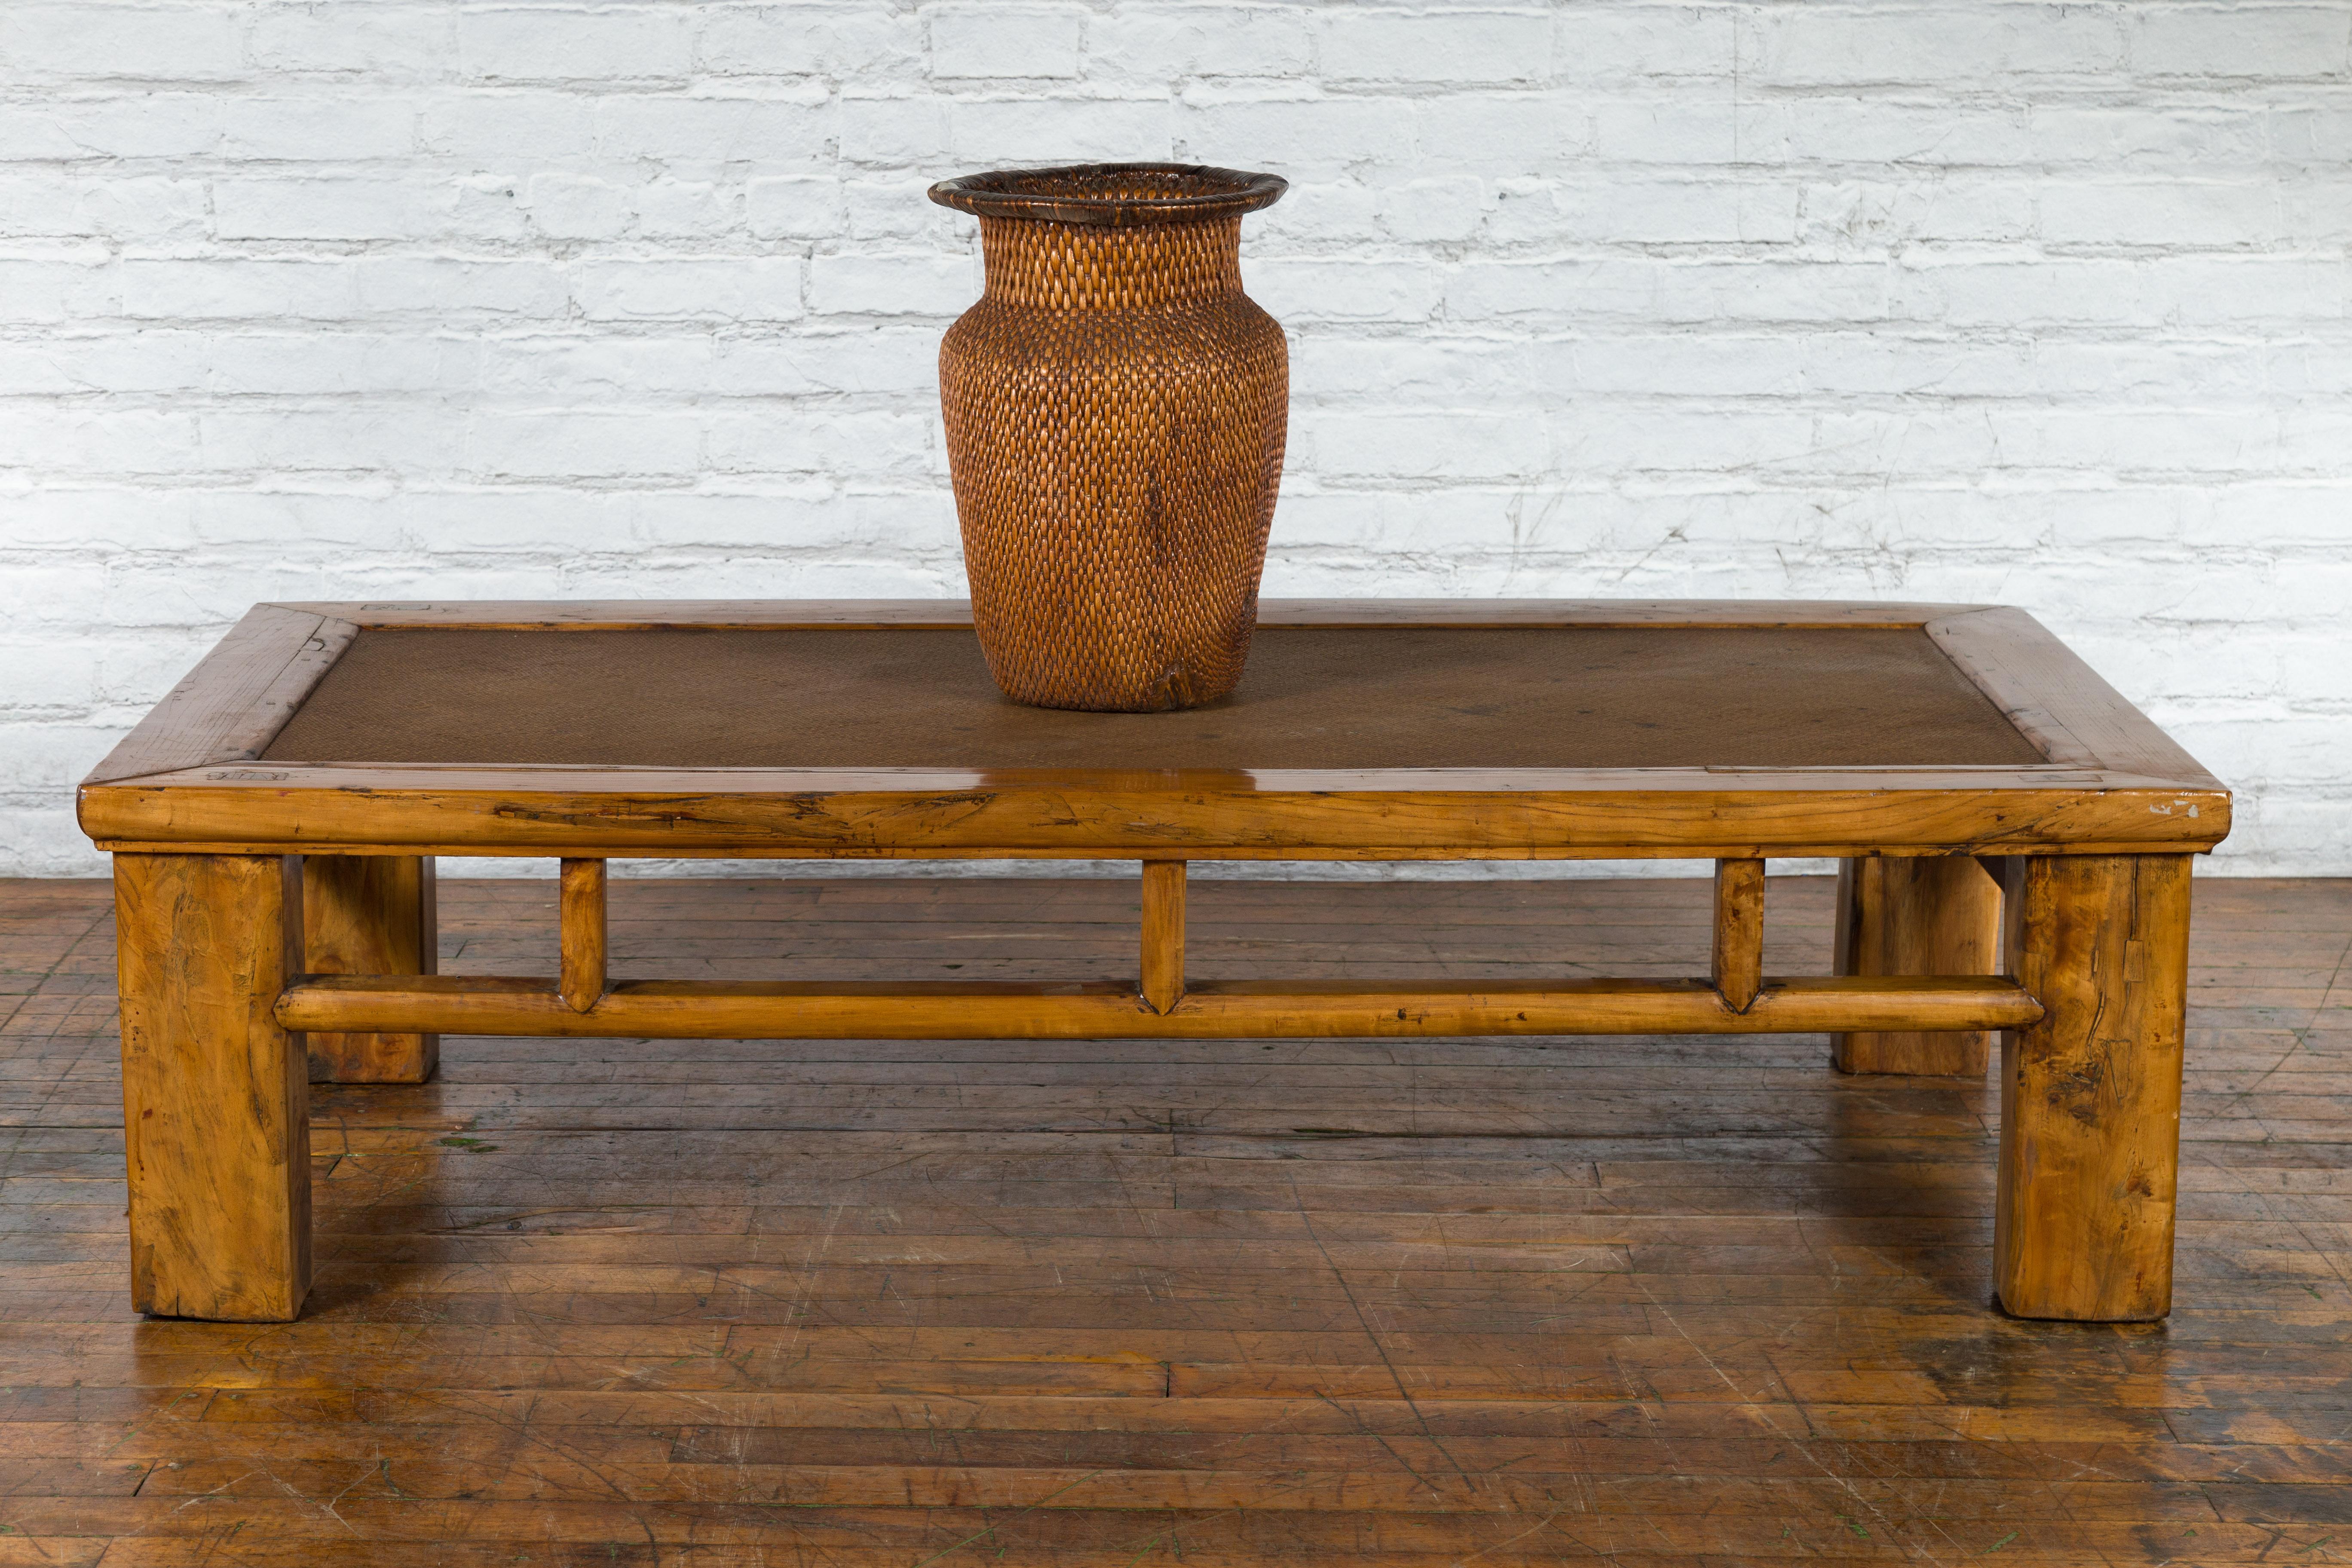 Chinese Qing Dynasty Elm Lohan Bed Coffee Table with Hand-Woven Rattan Top In Good Condition For Sale In Yonkers, NY